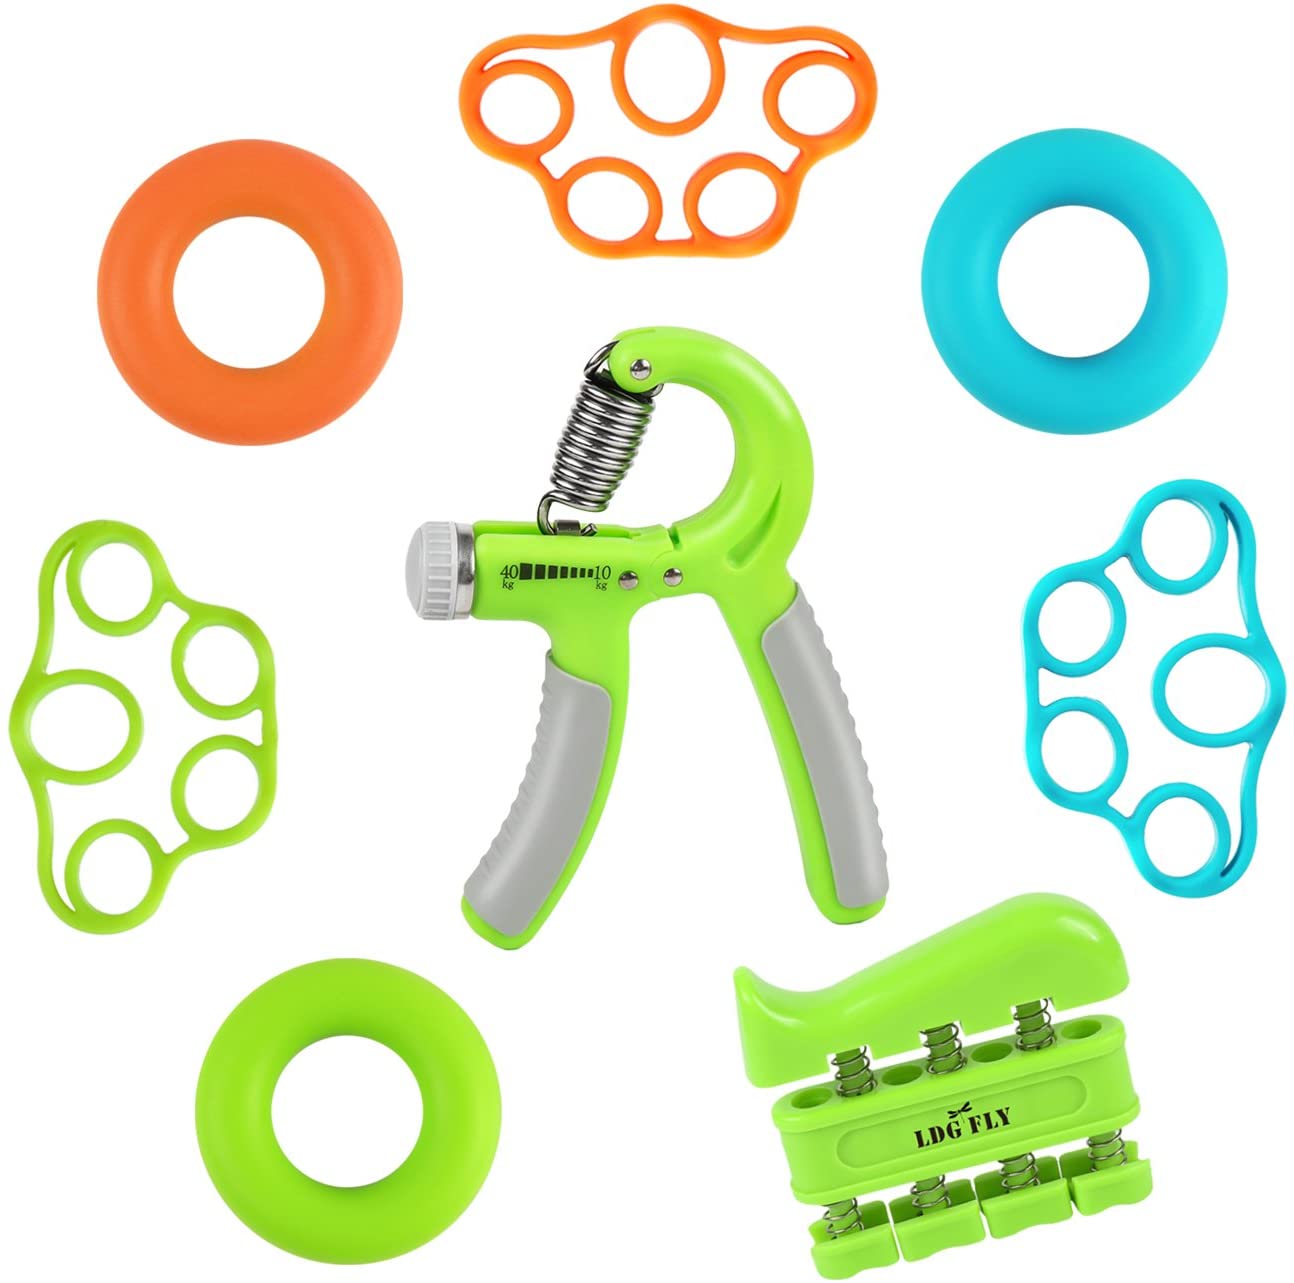 Hand Grip Strengthener Workout Muscle Grip Training Ring Kit Finger Gripper Gym Fitness Exercise Accessories Rehabilitation Tool